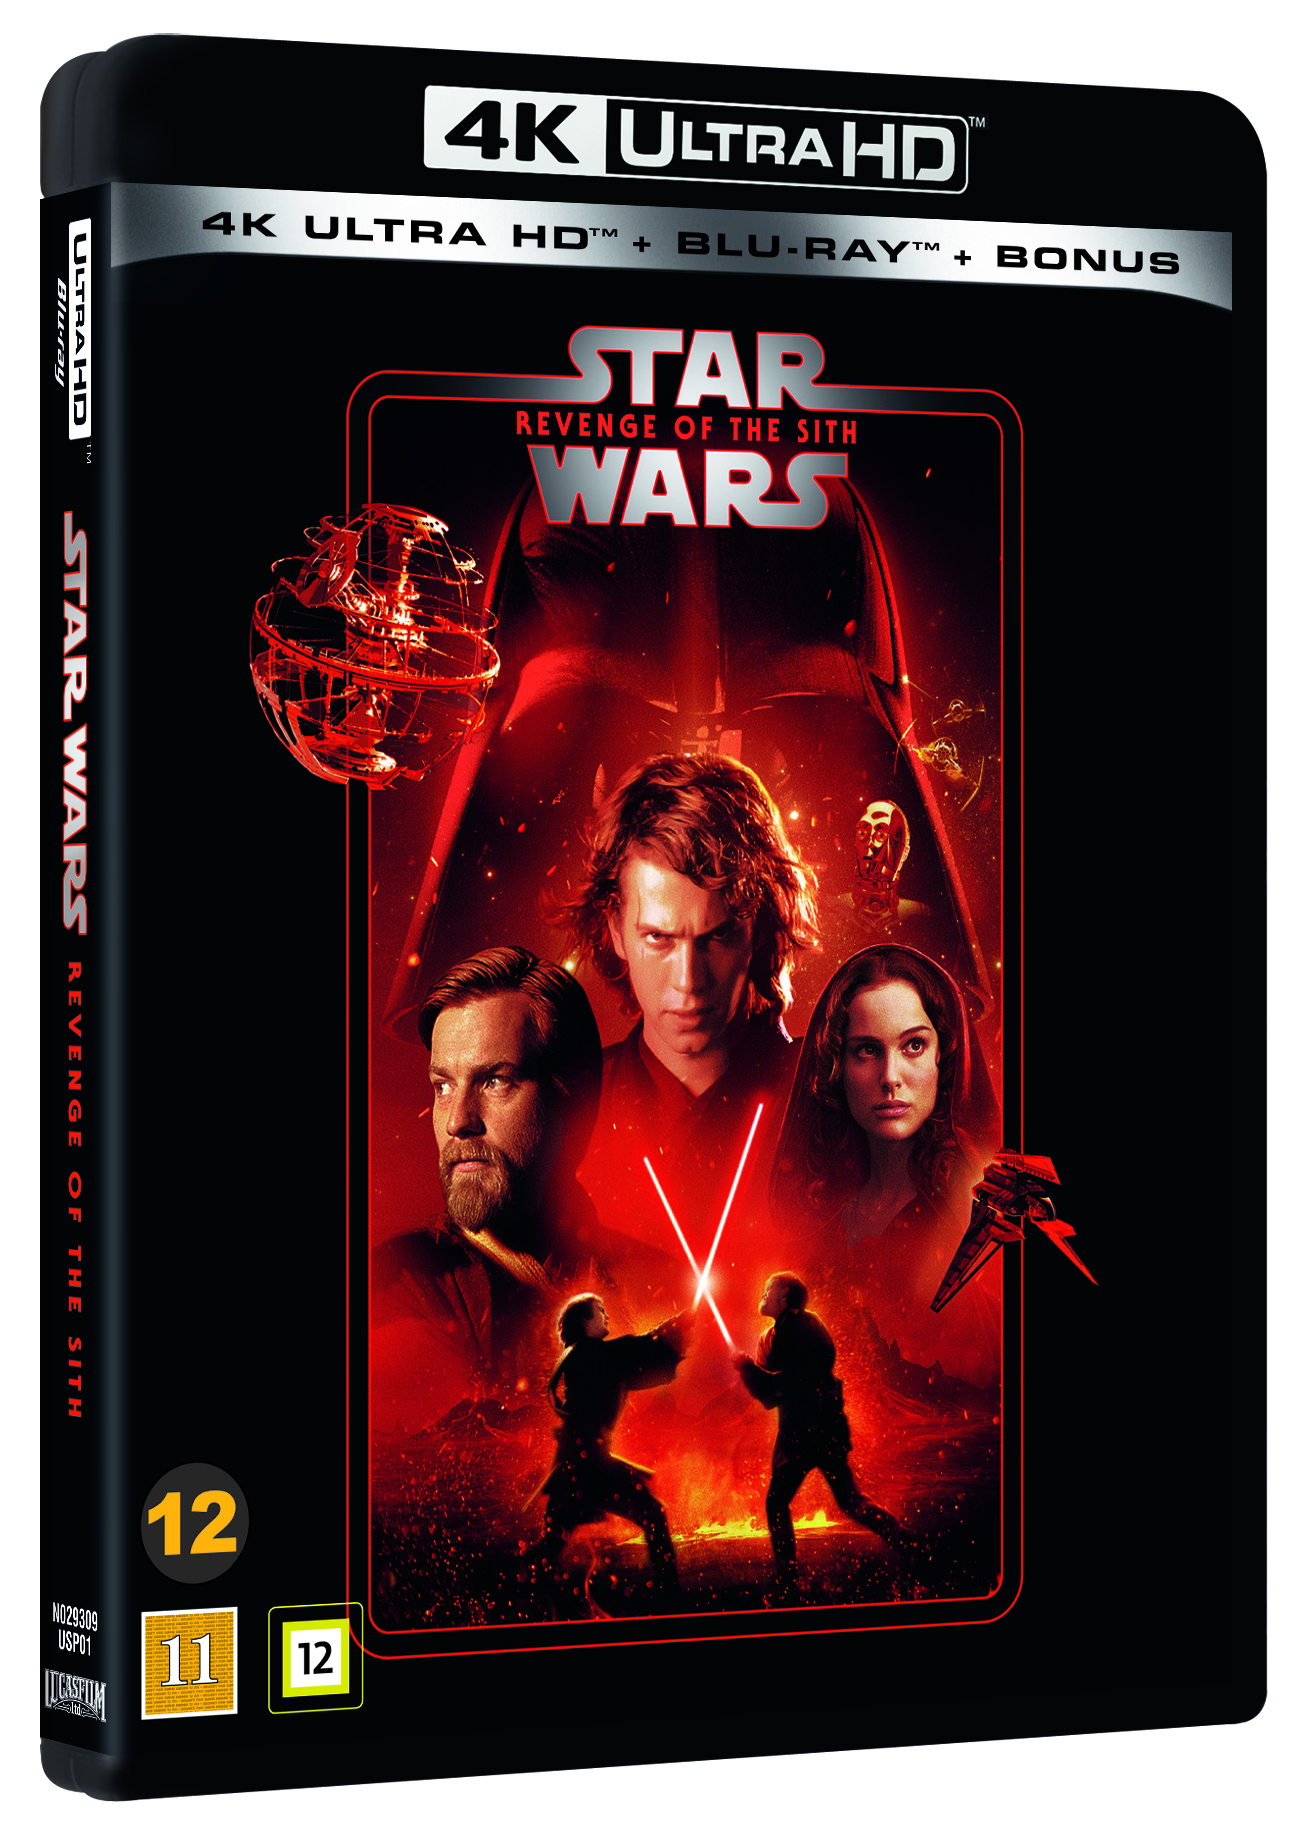 Star Wars Ep. III: Revenge of the Sith download the new version for ipod